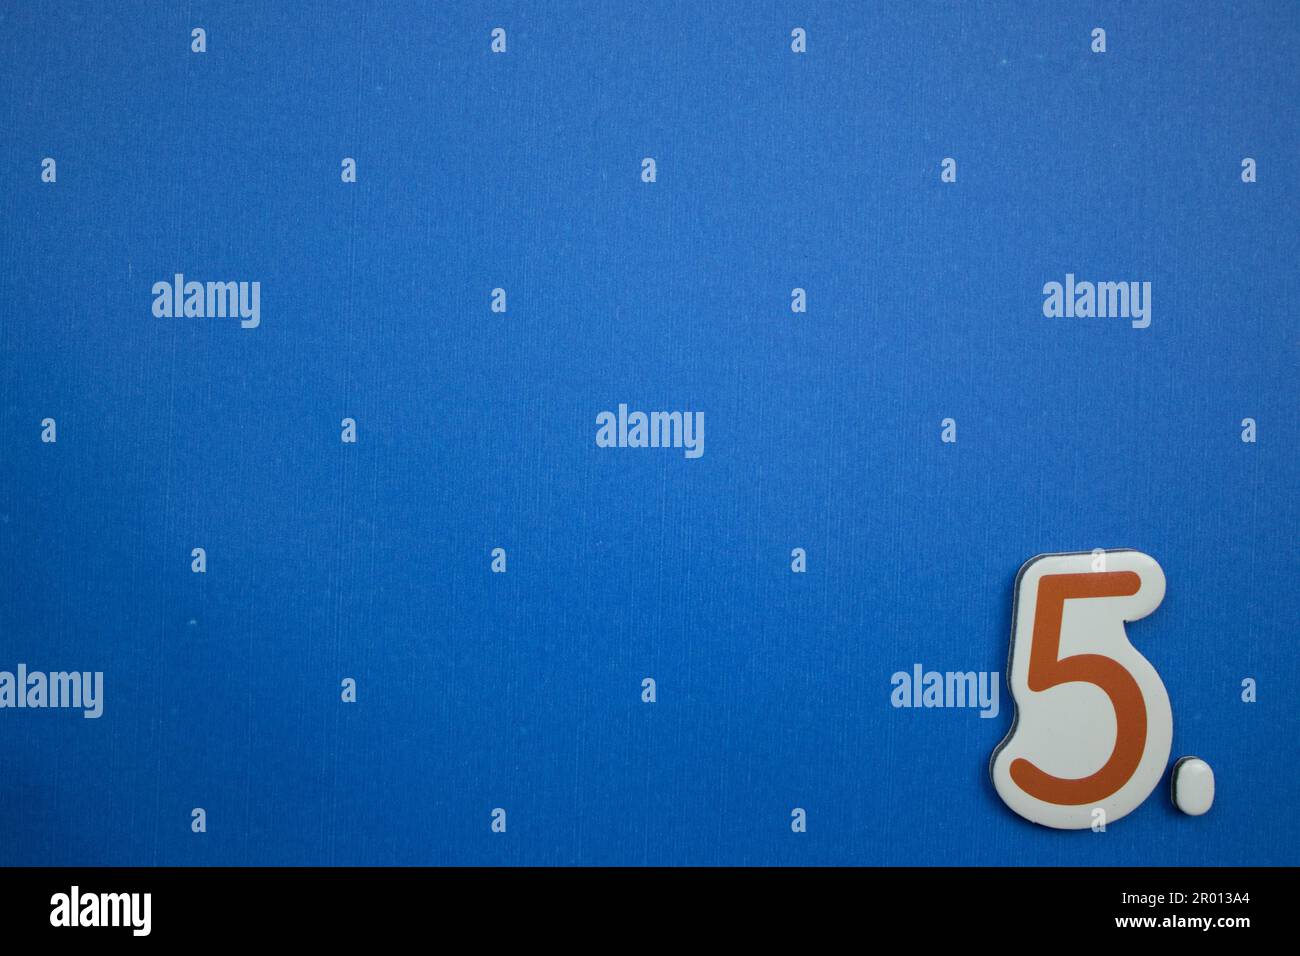 The number 5, orange and white, photographed from above, placed on the edge of a blue background. Stock Photo